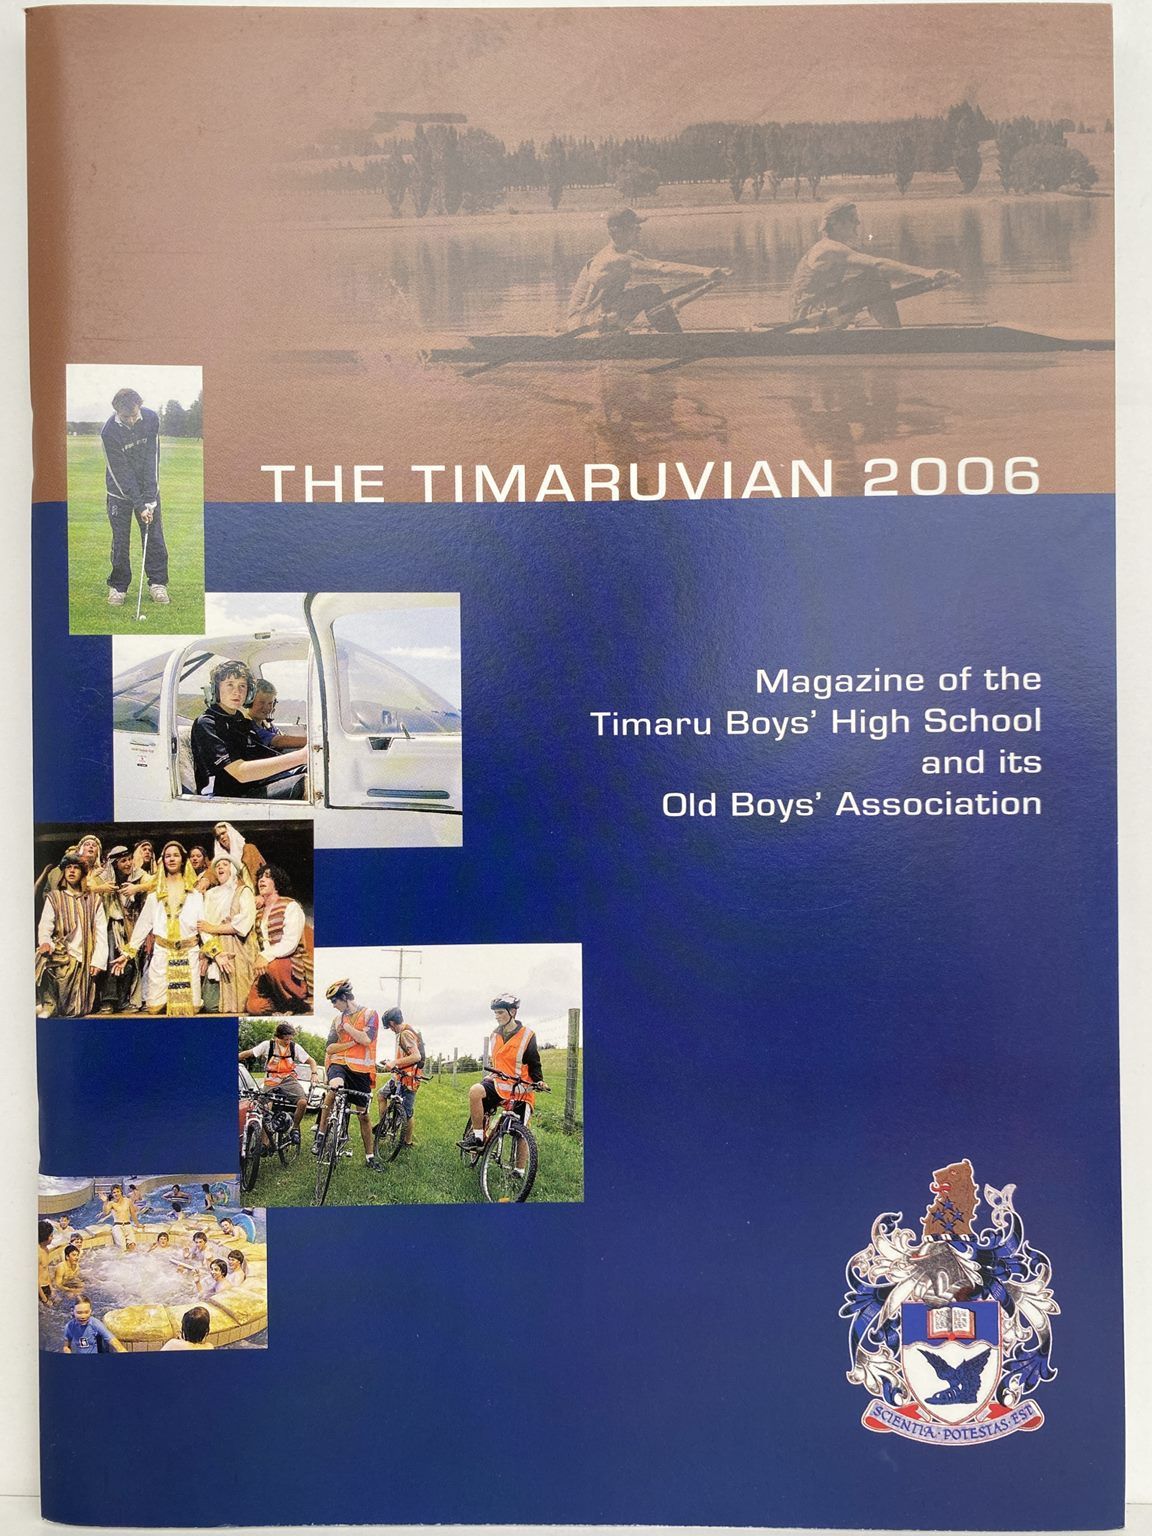 THE TIMARUVIAN: Magazine of the Timaru Boys' High School and its Old Boys' Association 2006